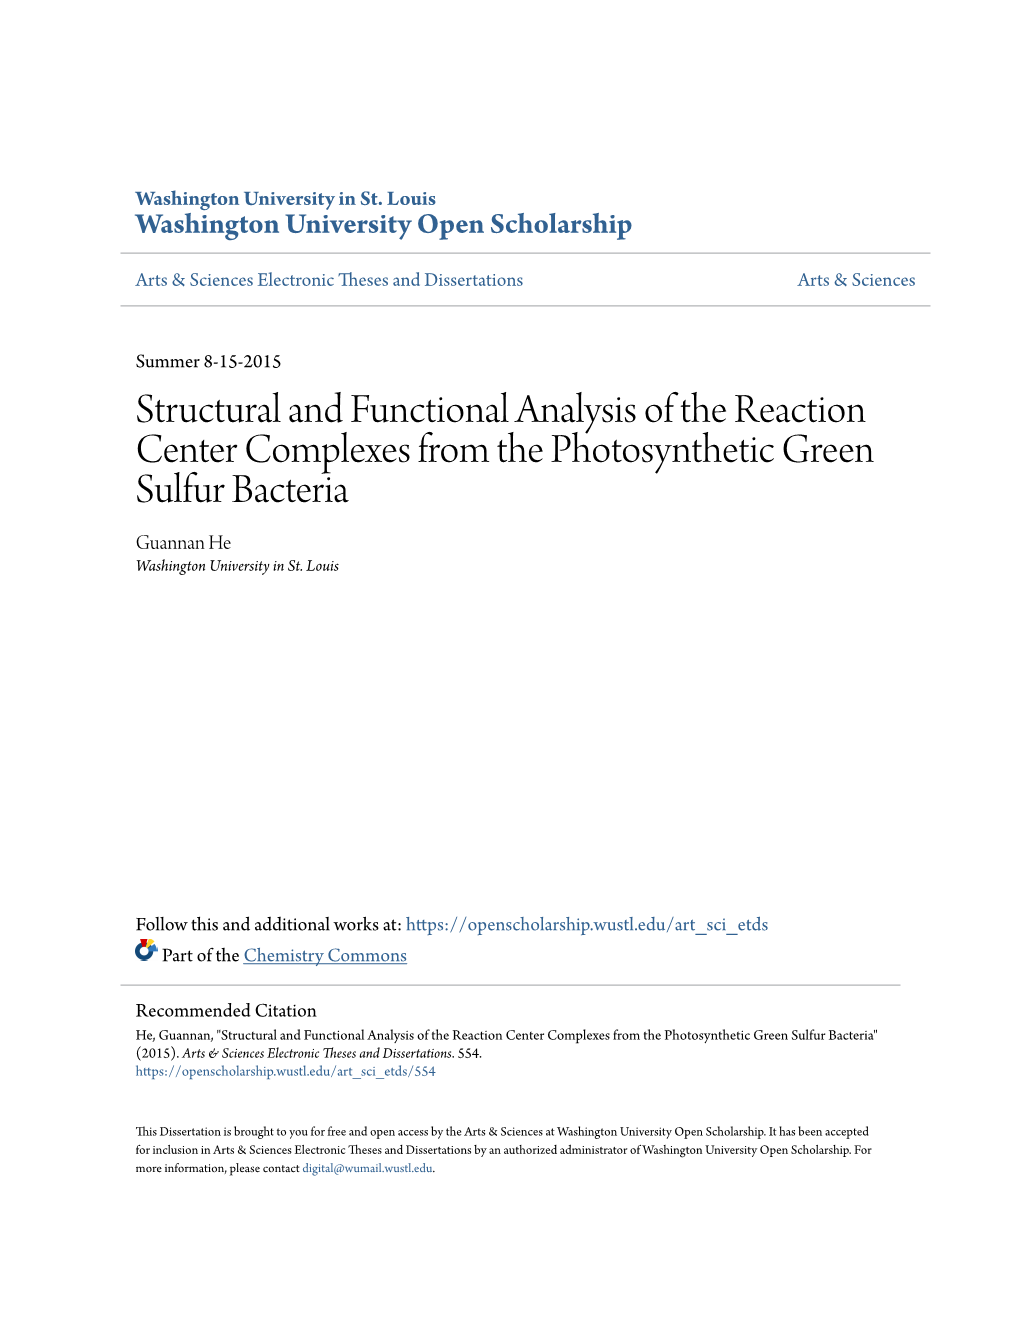 Structural and Functional Analysis of the Reaction Center Complexes from the Photosynthetic Green Sulfur Bacteria Guannan He Washington University in St